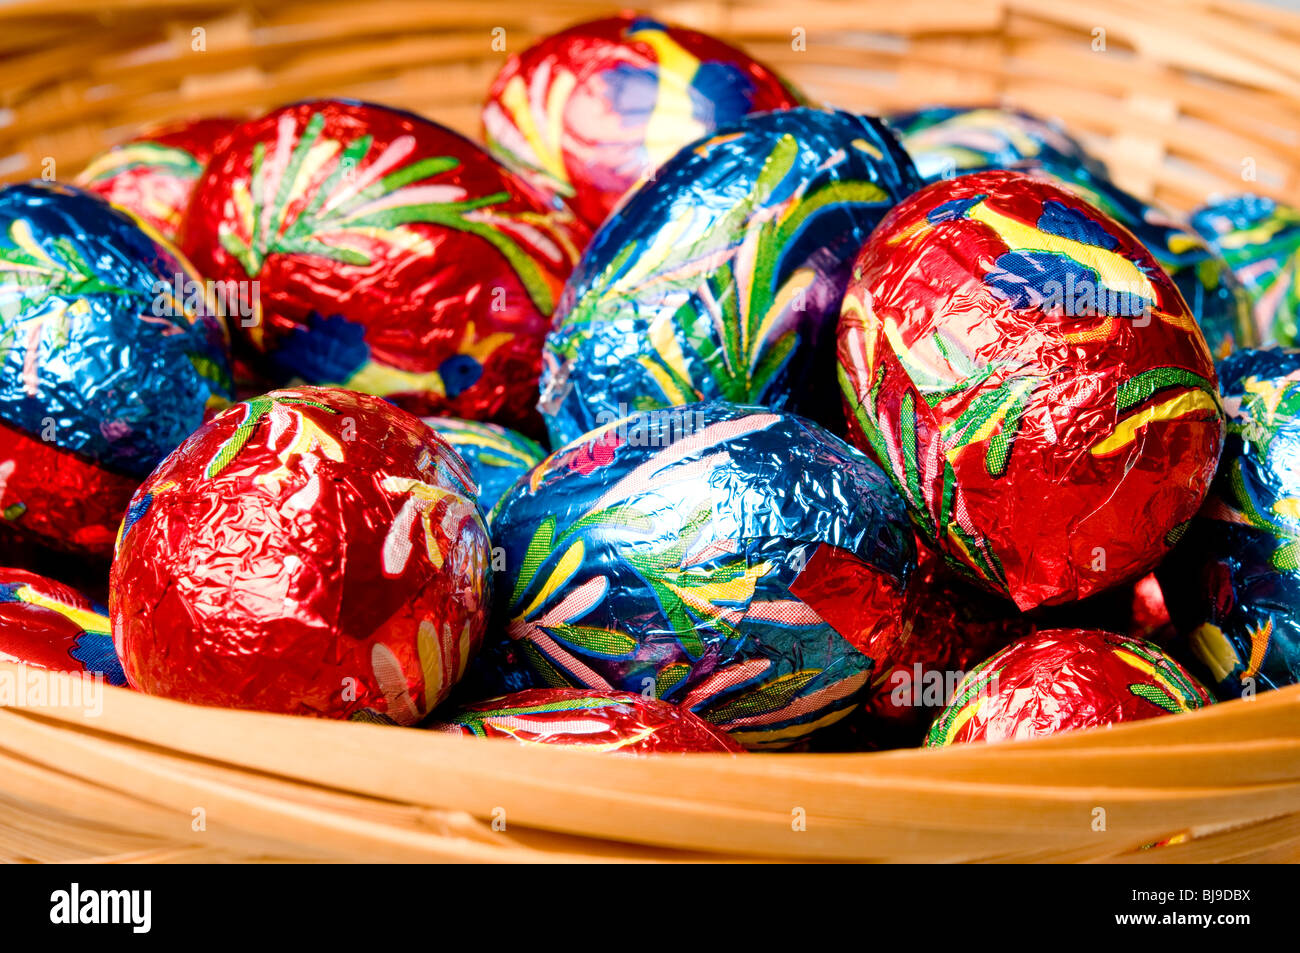 Easter chocolate eggs in colorful wrap Stock Photo